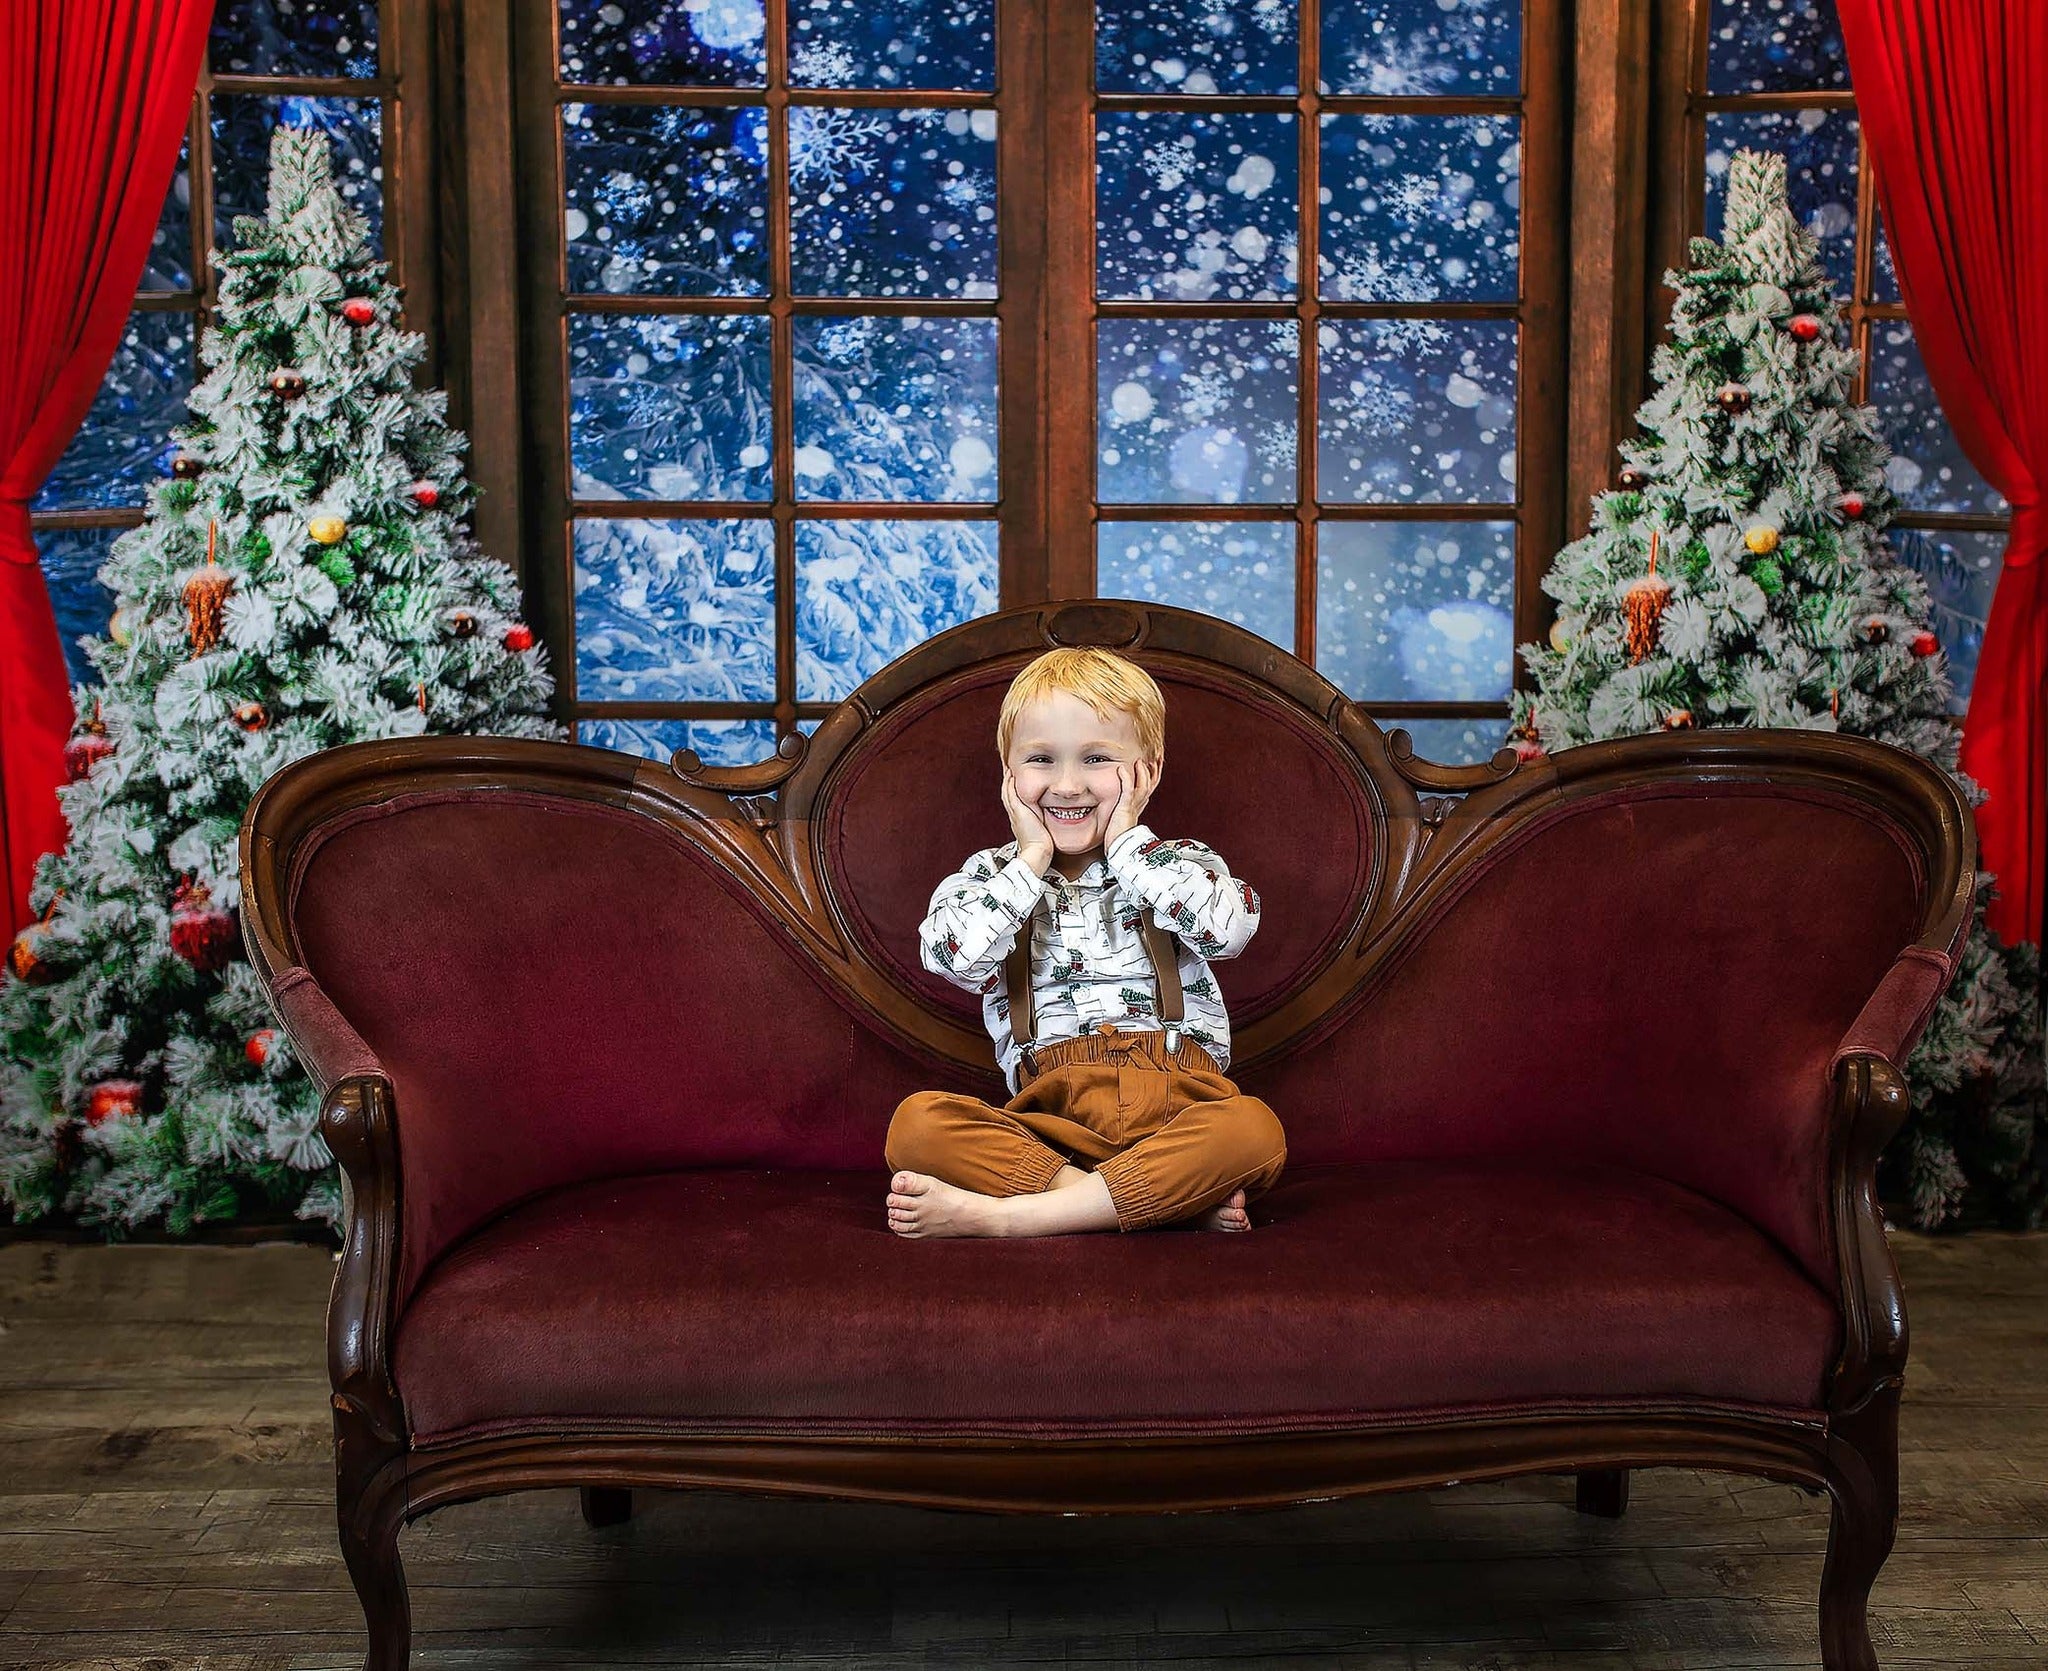 Kate Winter Snow Christmas Window Backdrop Designed by Chain Photography